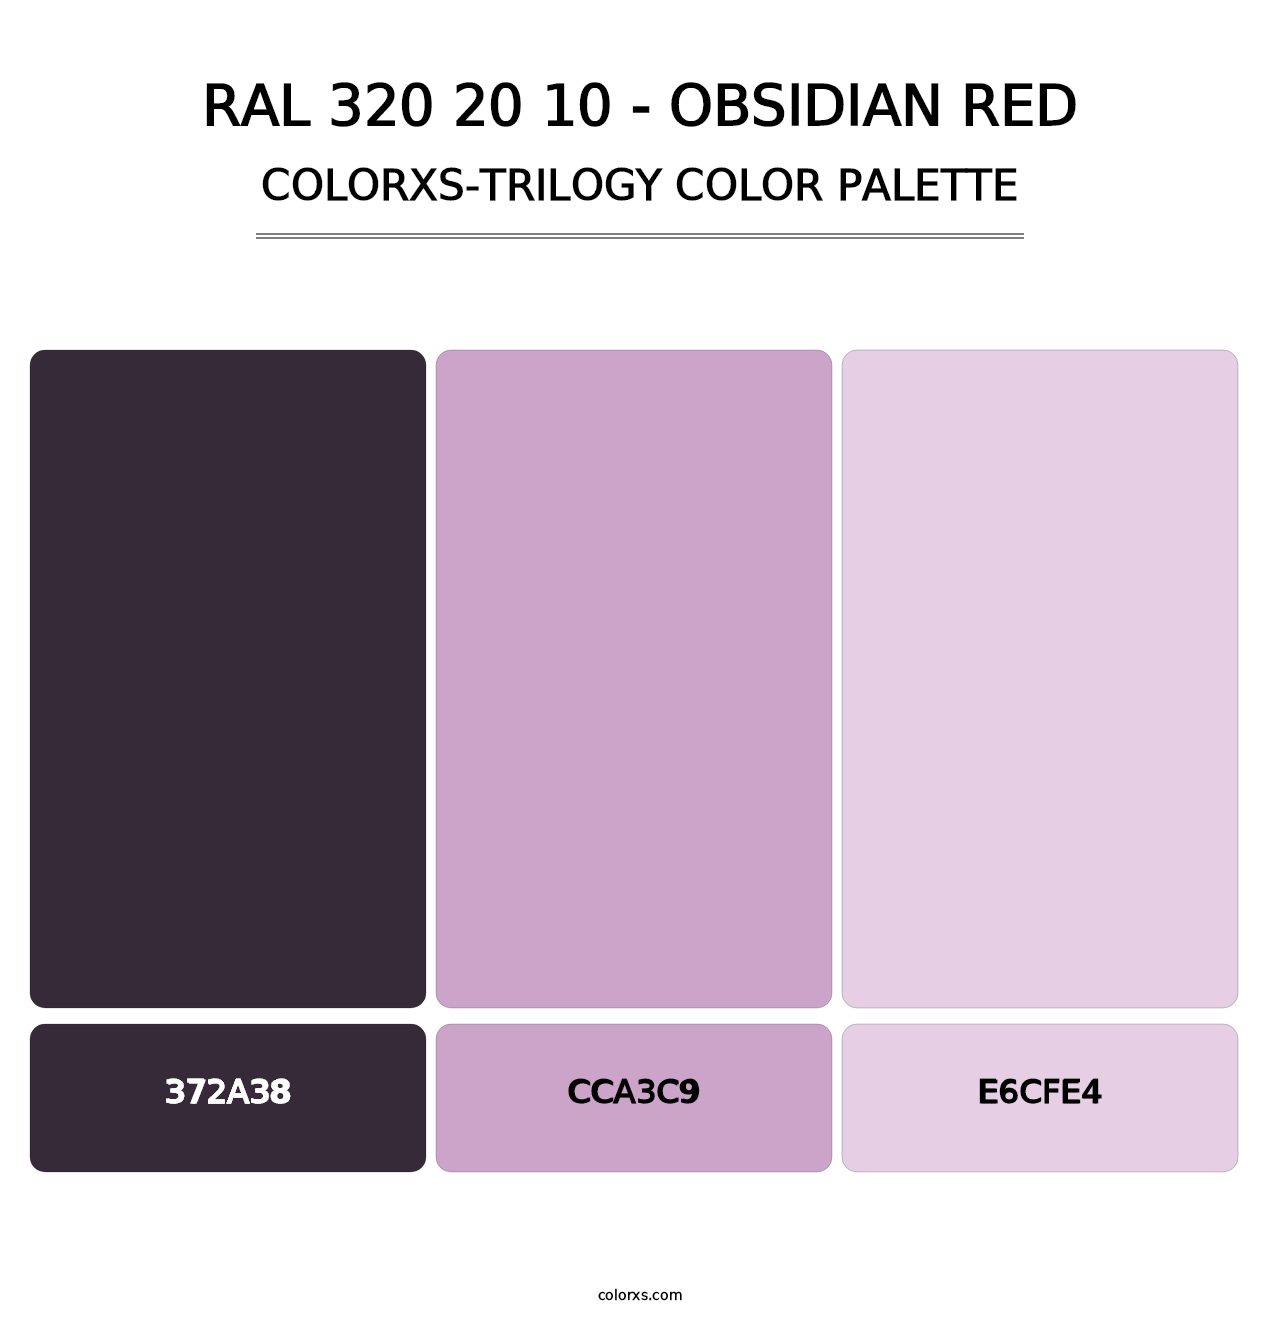 RAL 320 20 10 - Obsidian Red - Colorxs Trilogy Palette